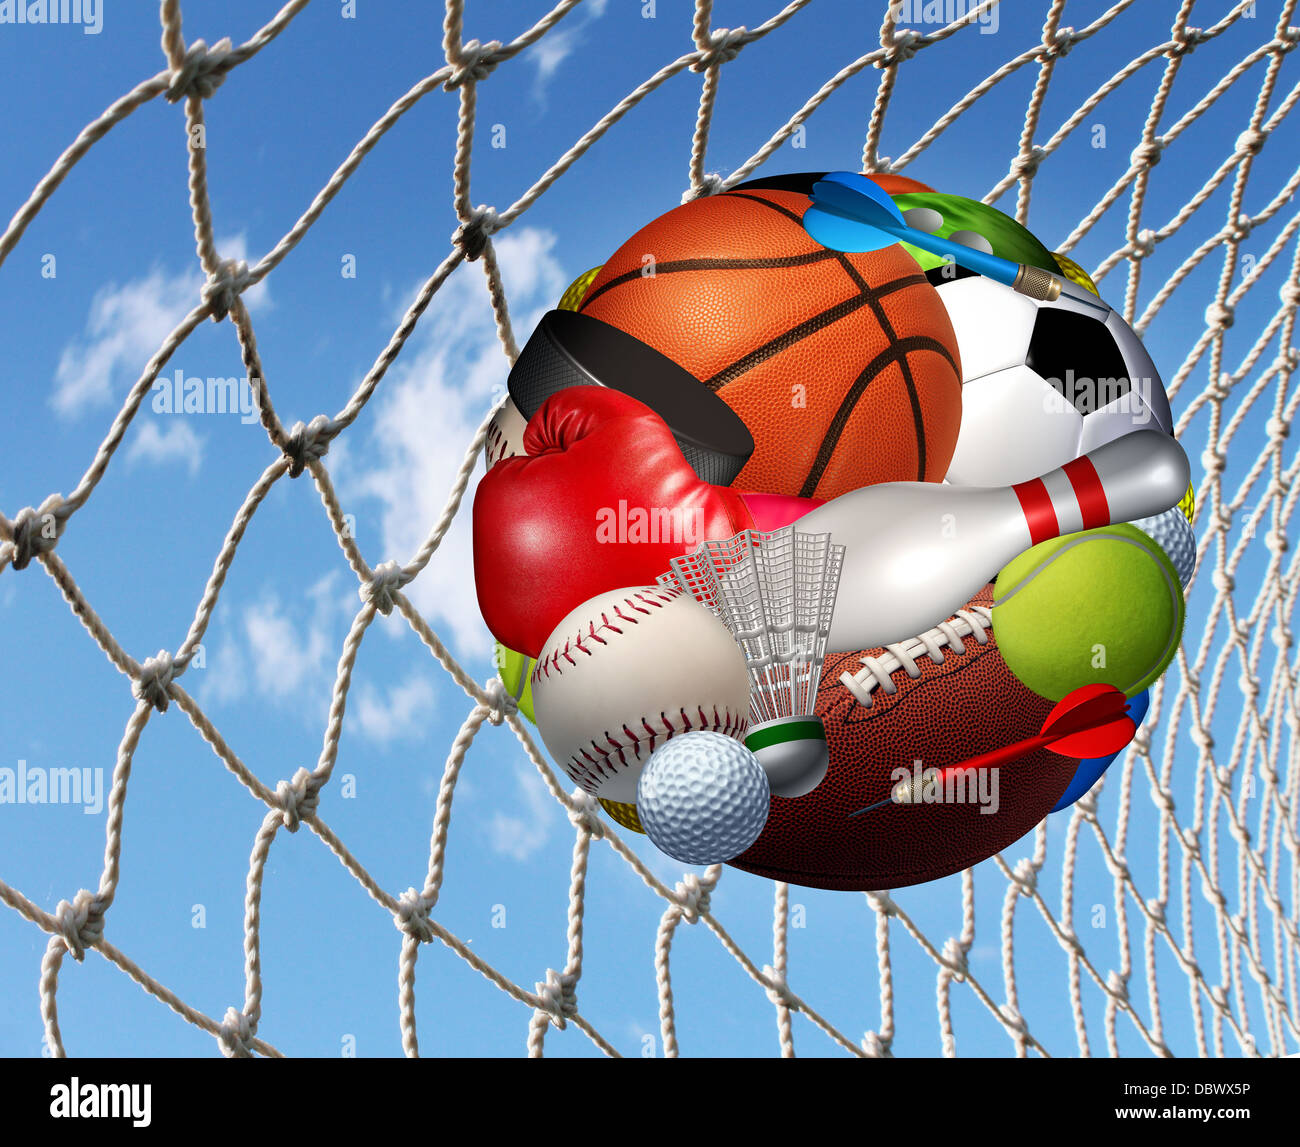 Sports activity success concept and fitness activities through the playing of a team or individual sport with aball made from a Stock Photo